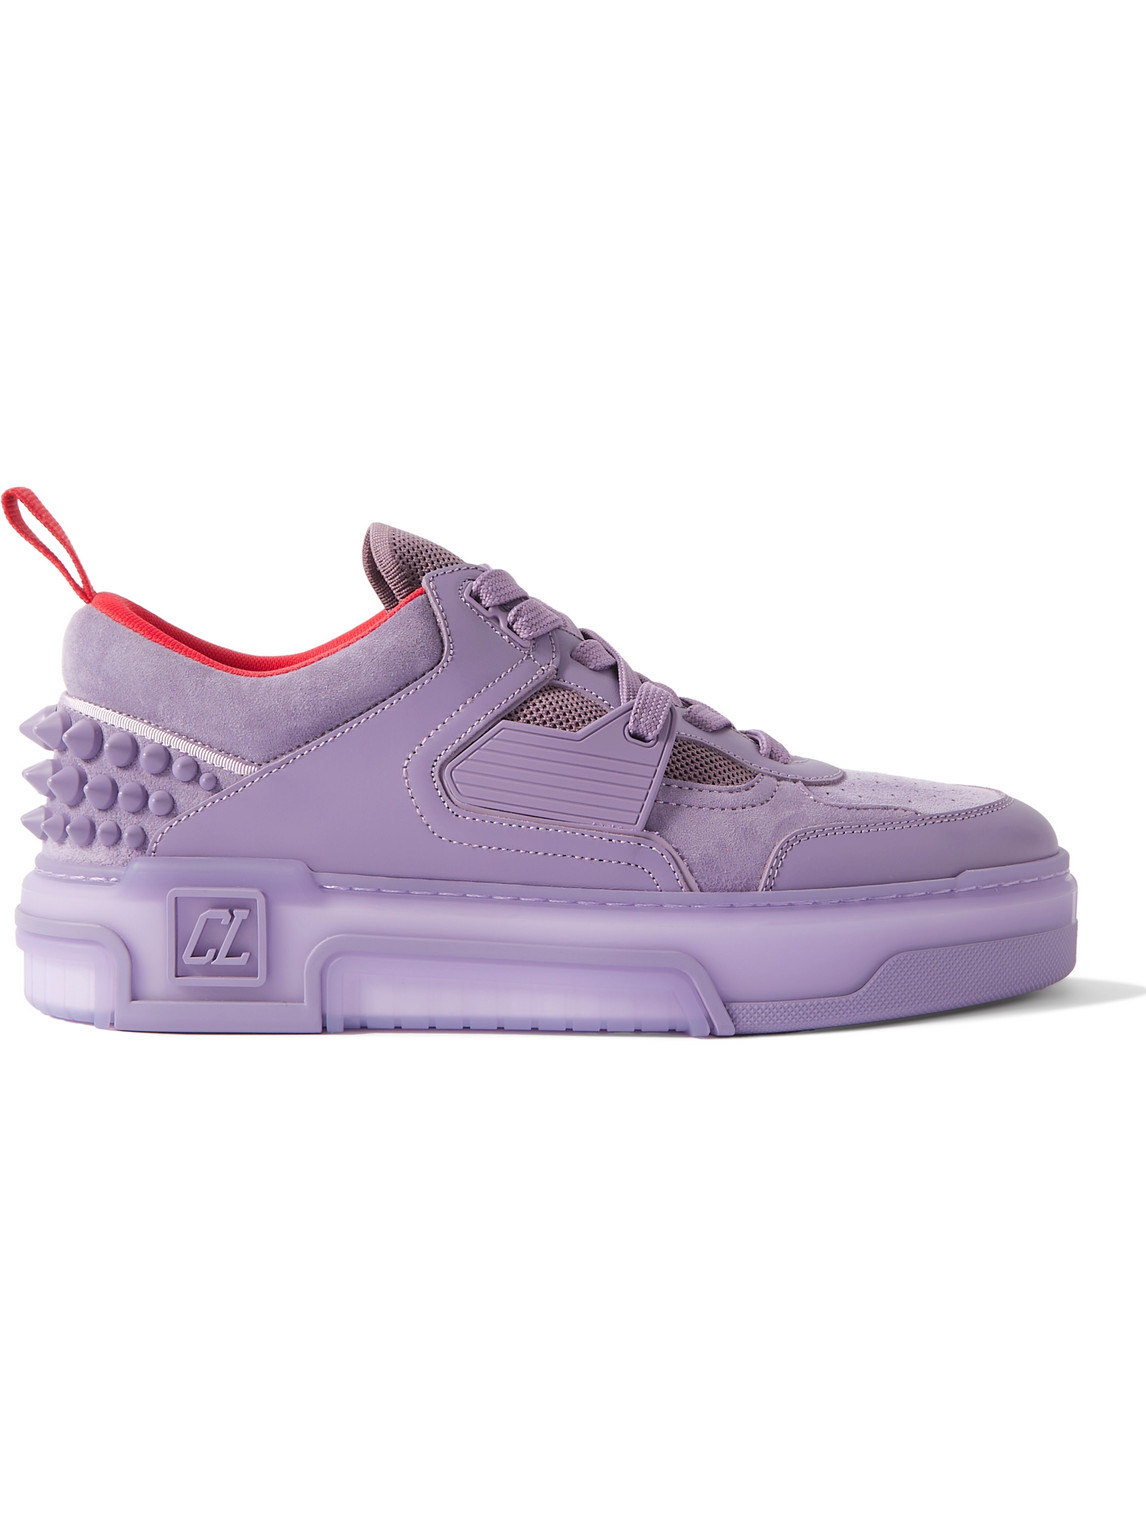 Christian Louboutin Astroloubi Spiked Leather, Suede And Mesh Trainers In Purple